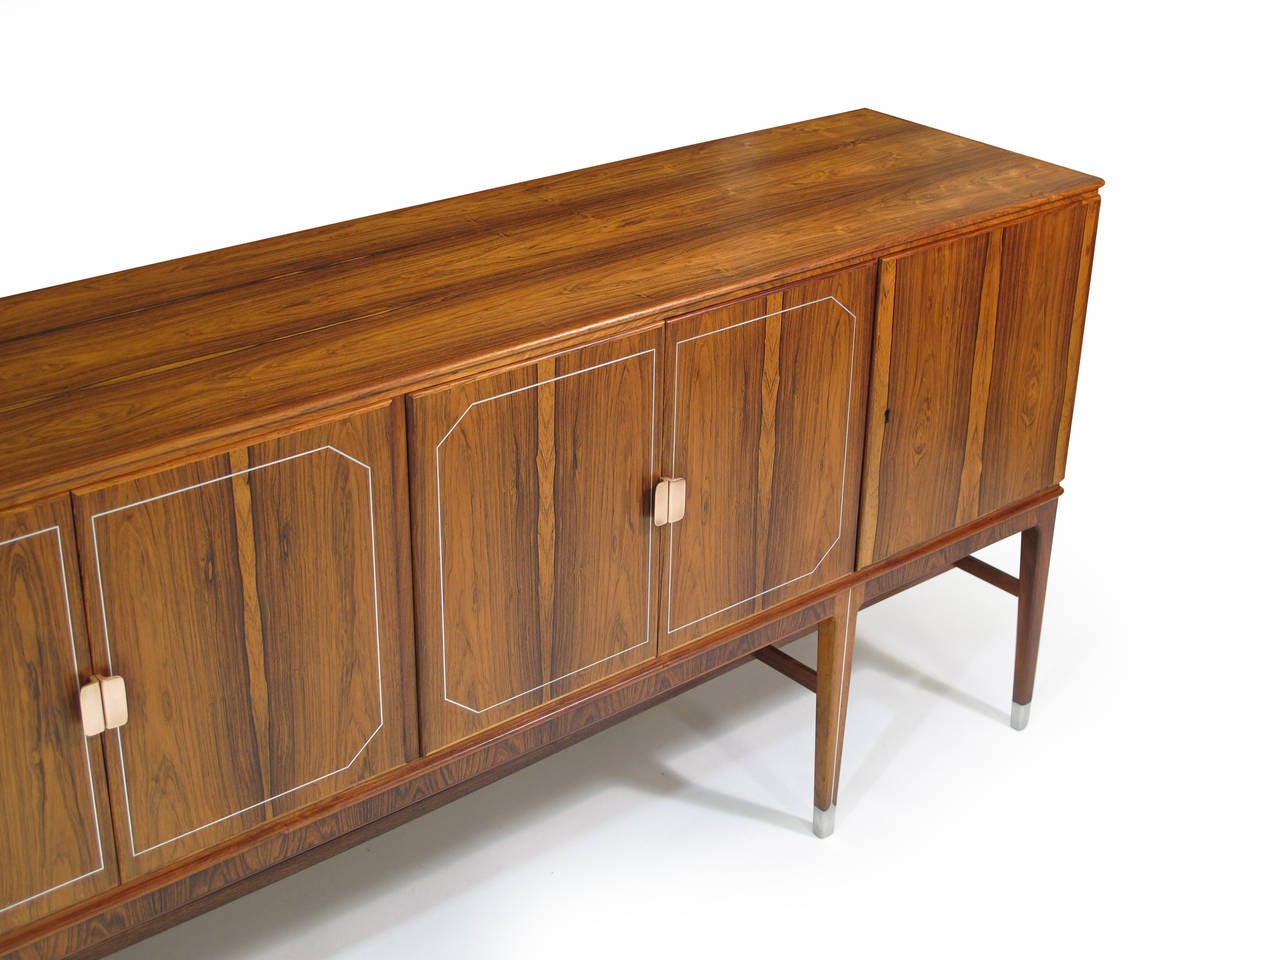 20th Century Georg Kofoed Rosewood Credenza with Eight-Karat White Gold Inlay